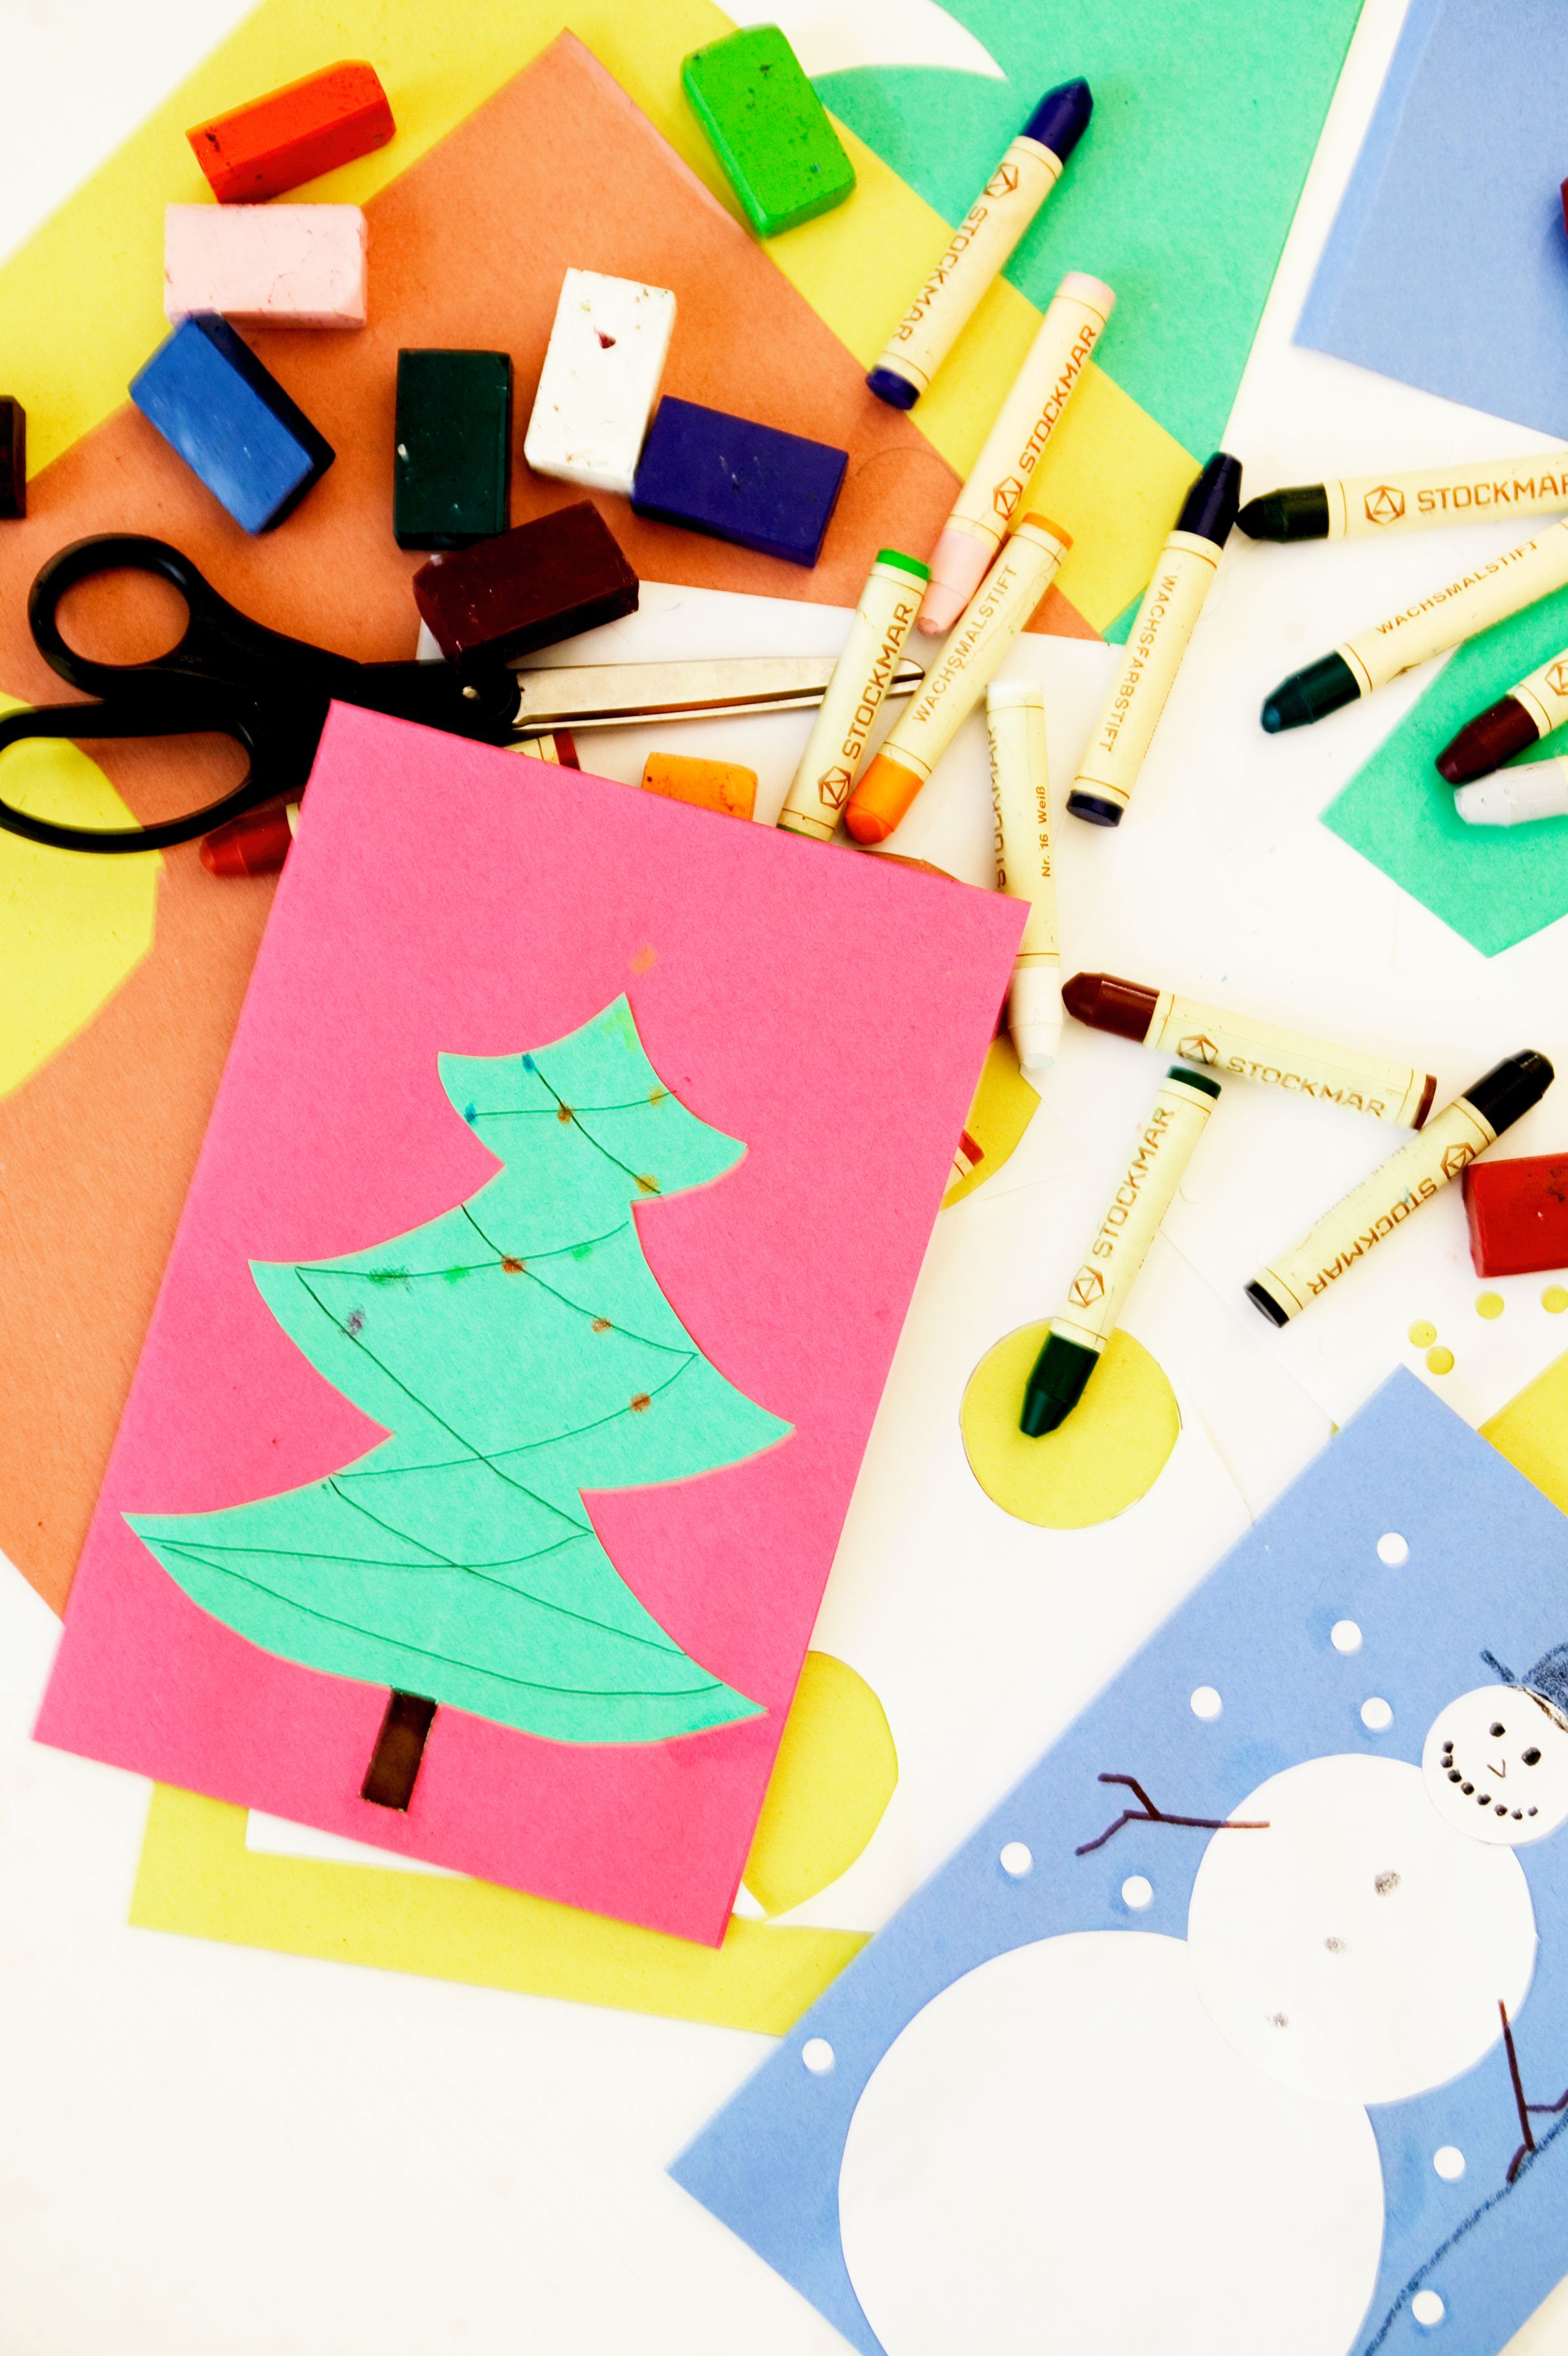 Holiday cards and art supplies